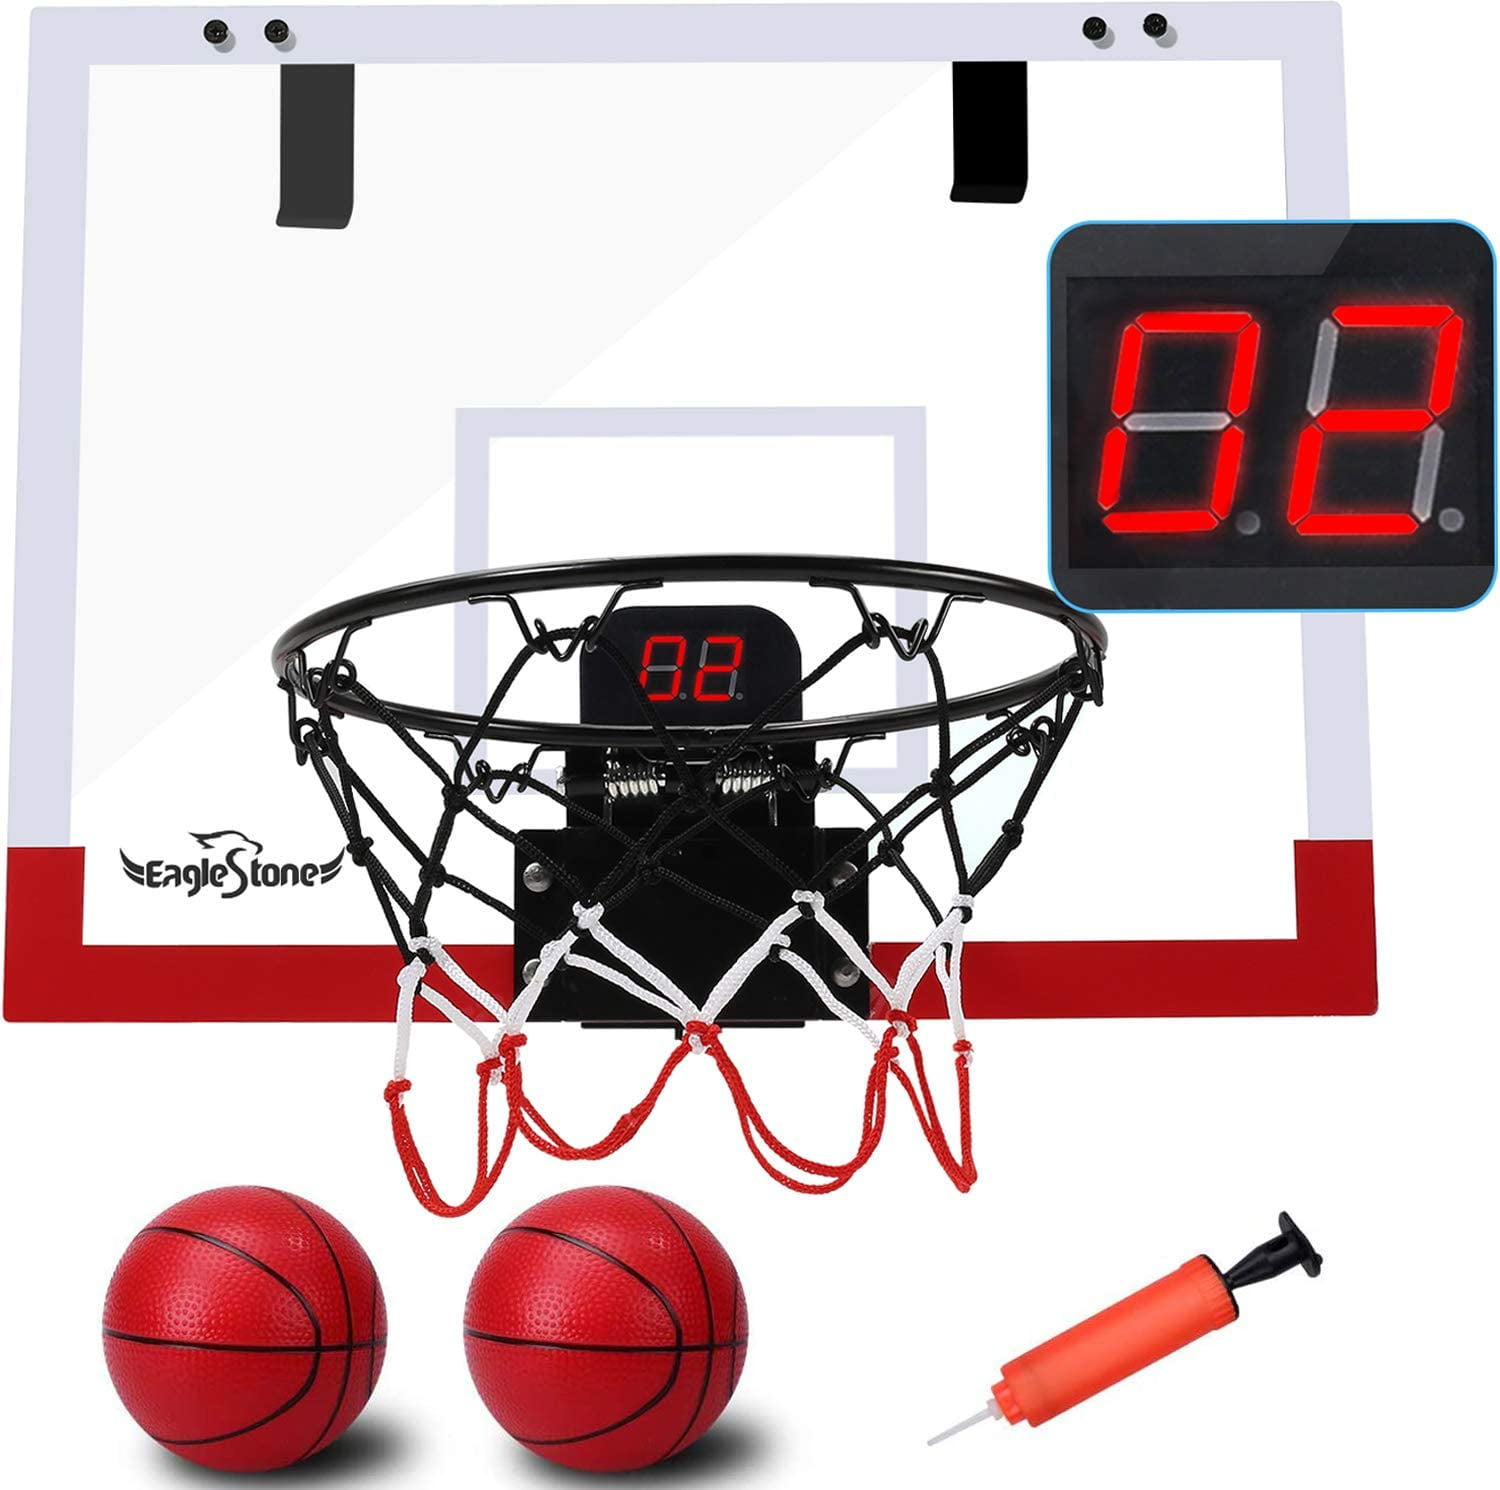 Mini Double Basketball Board Indoor Outdoor Home Office Wall w/LED Screen Scorer 